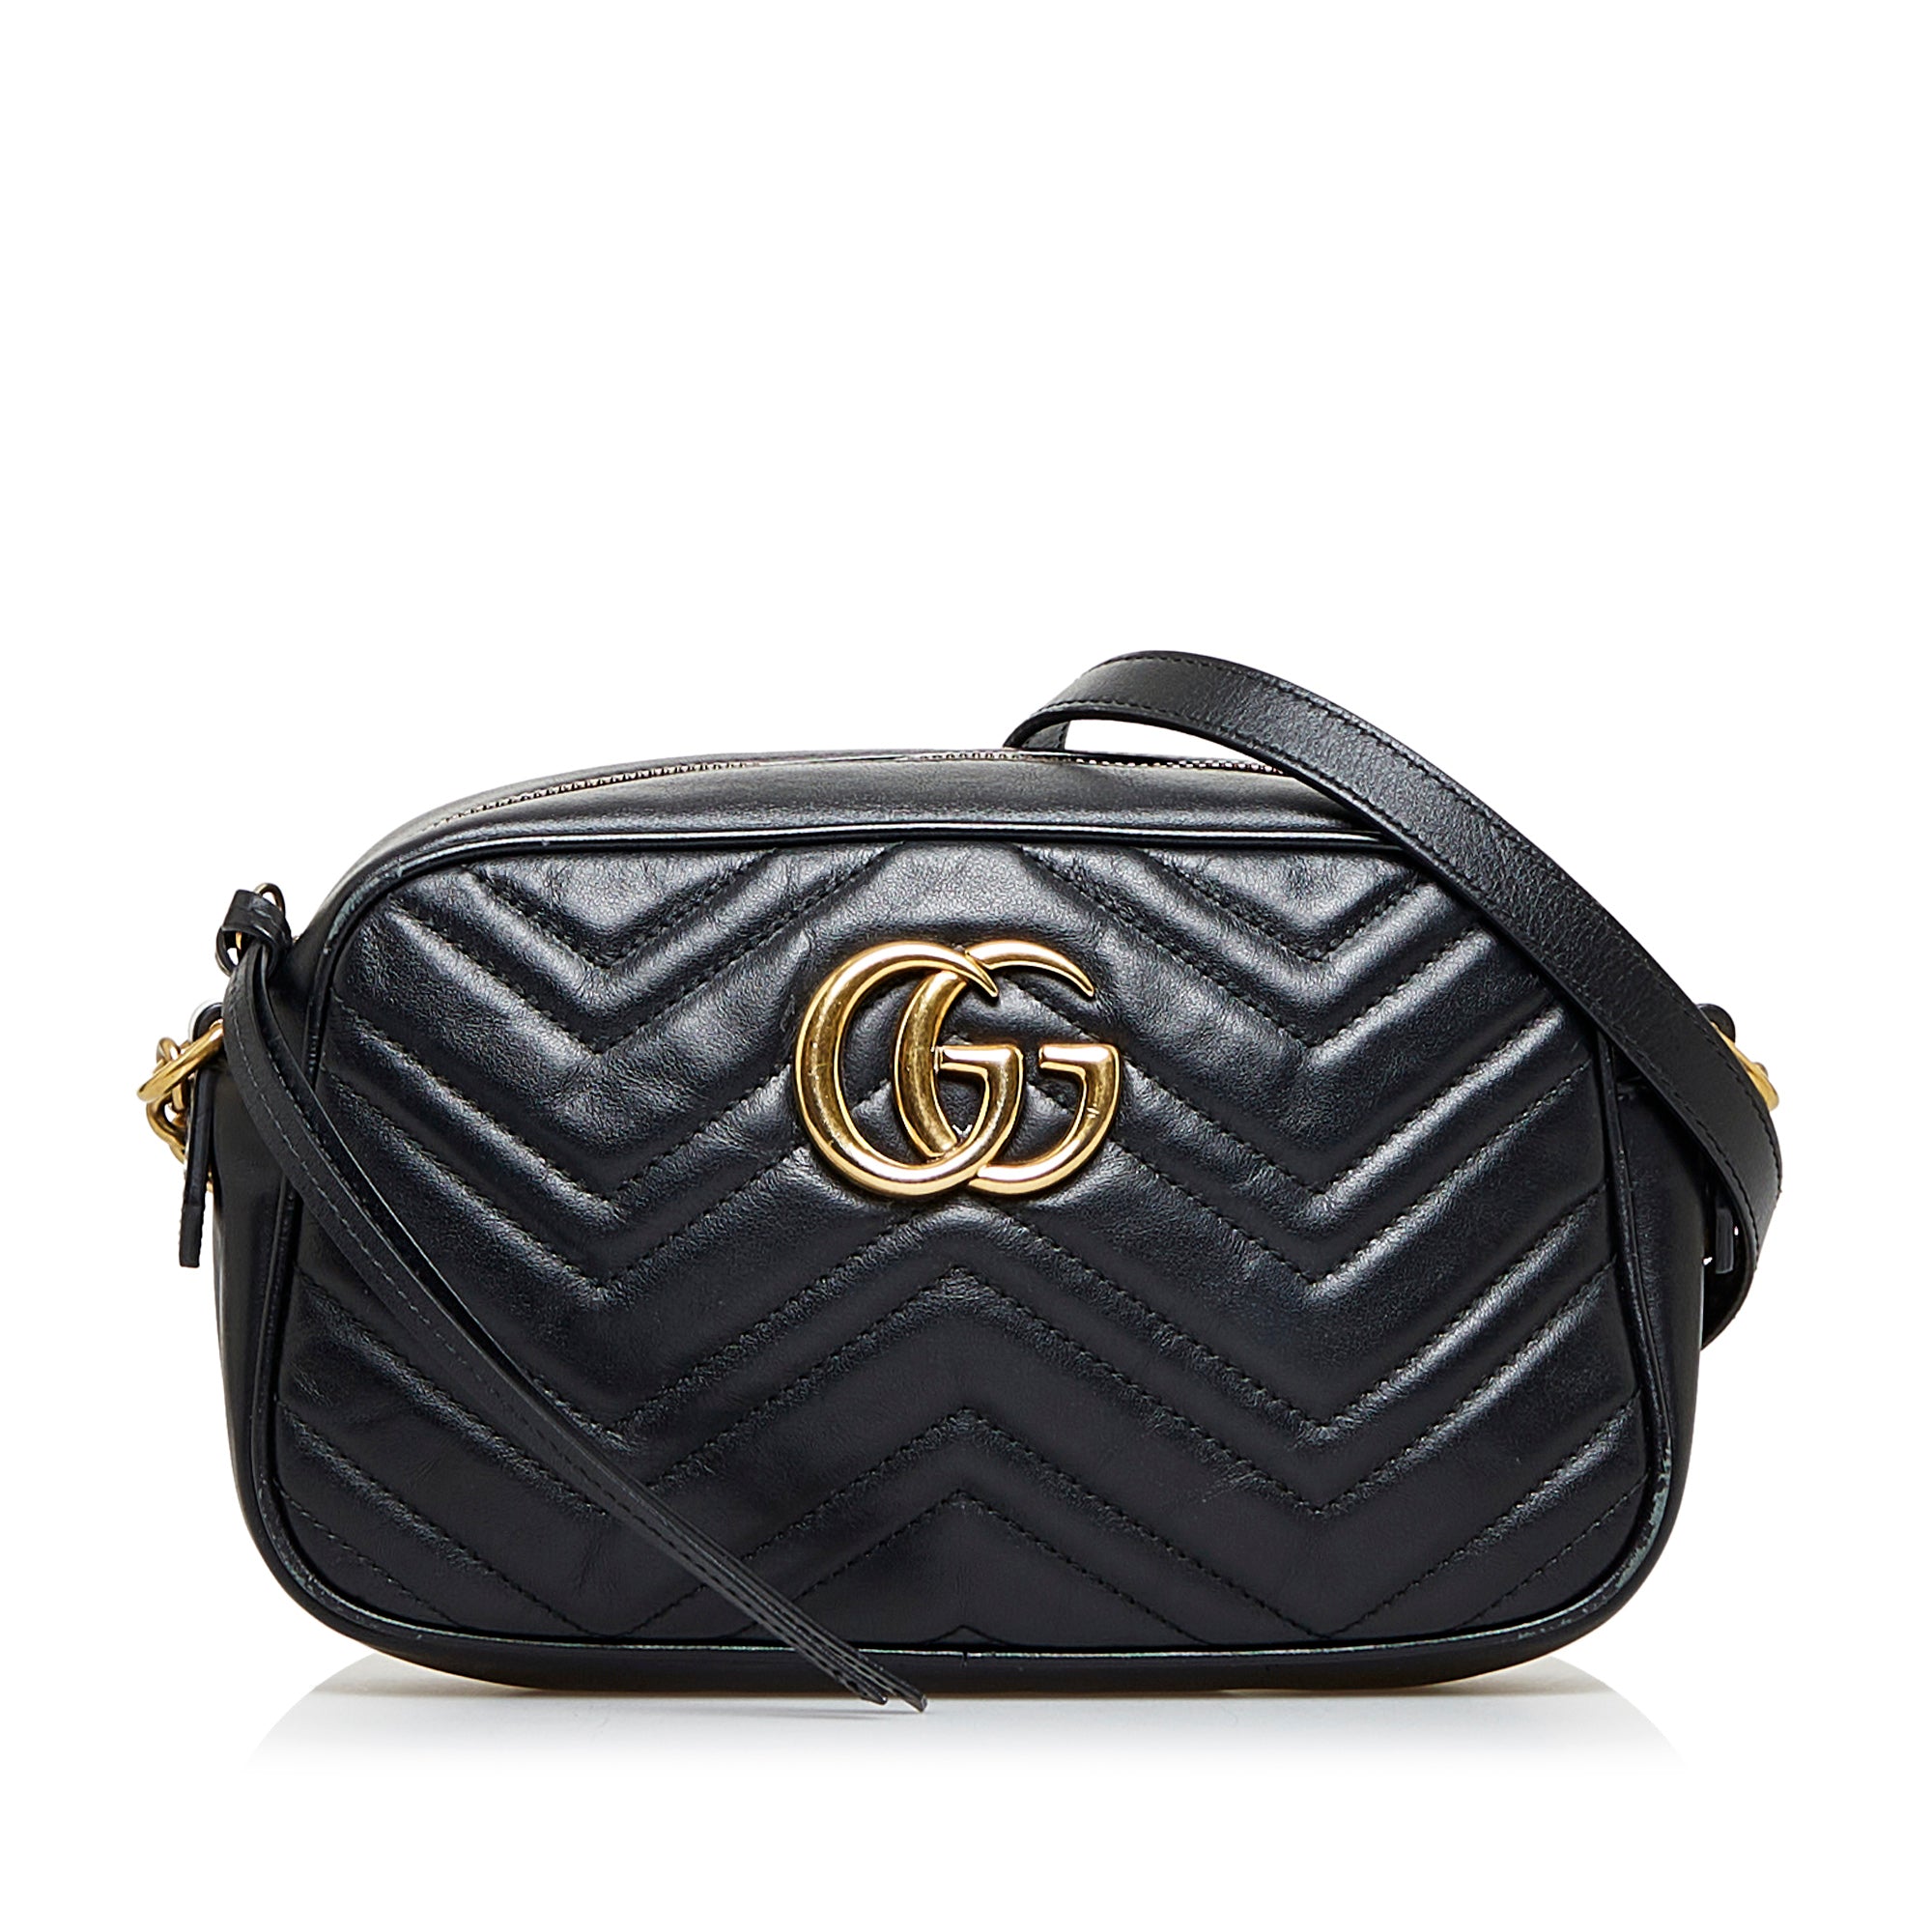 GG Marmont Quilted Leather Clutch in Black - Gucci